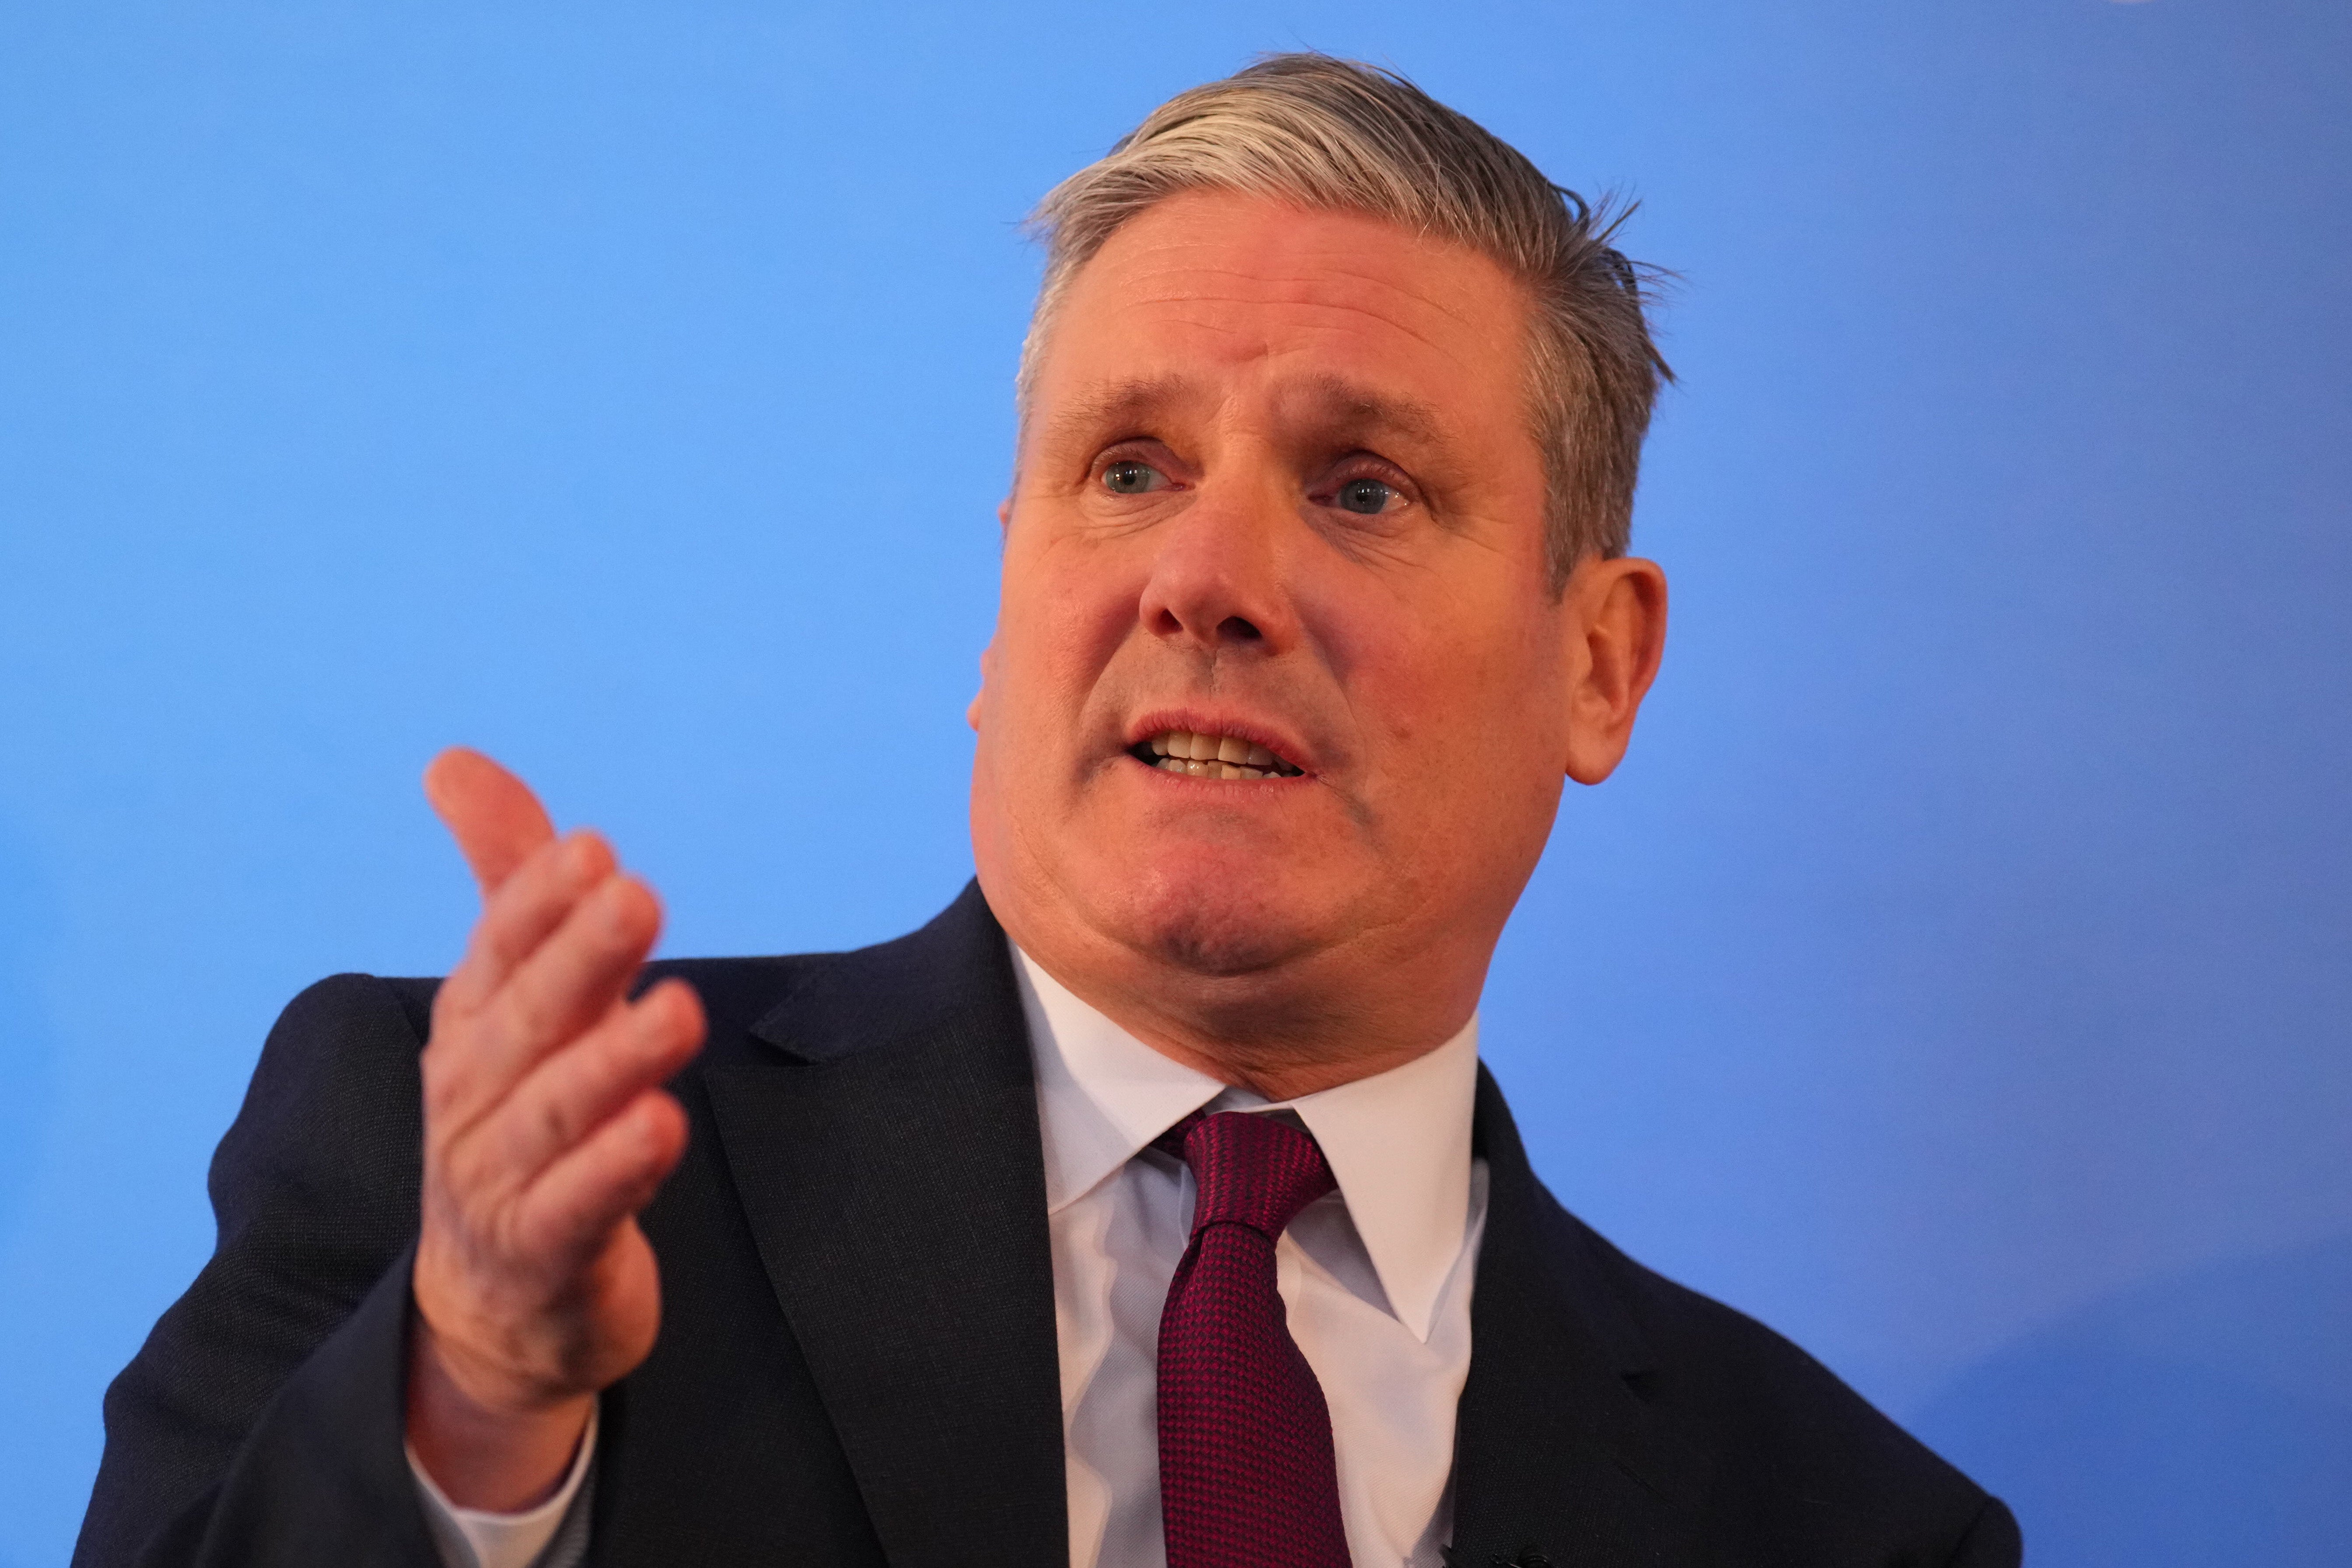 Labour leader Sir Keir Starmer has told the Commons his party supports the latest strikes on Rishi Houthi rebels in Yemen